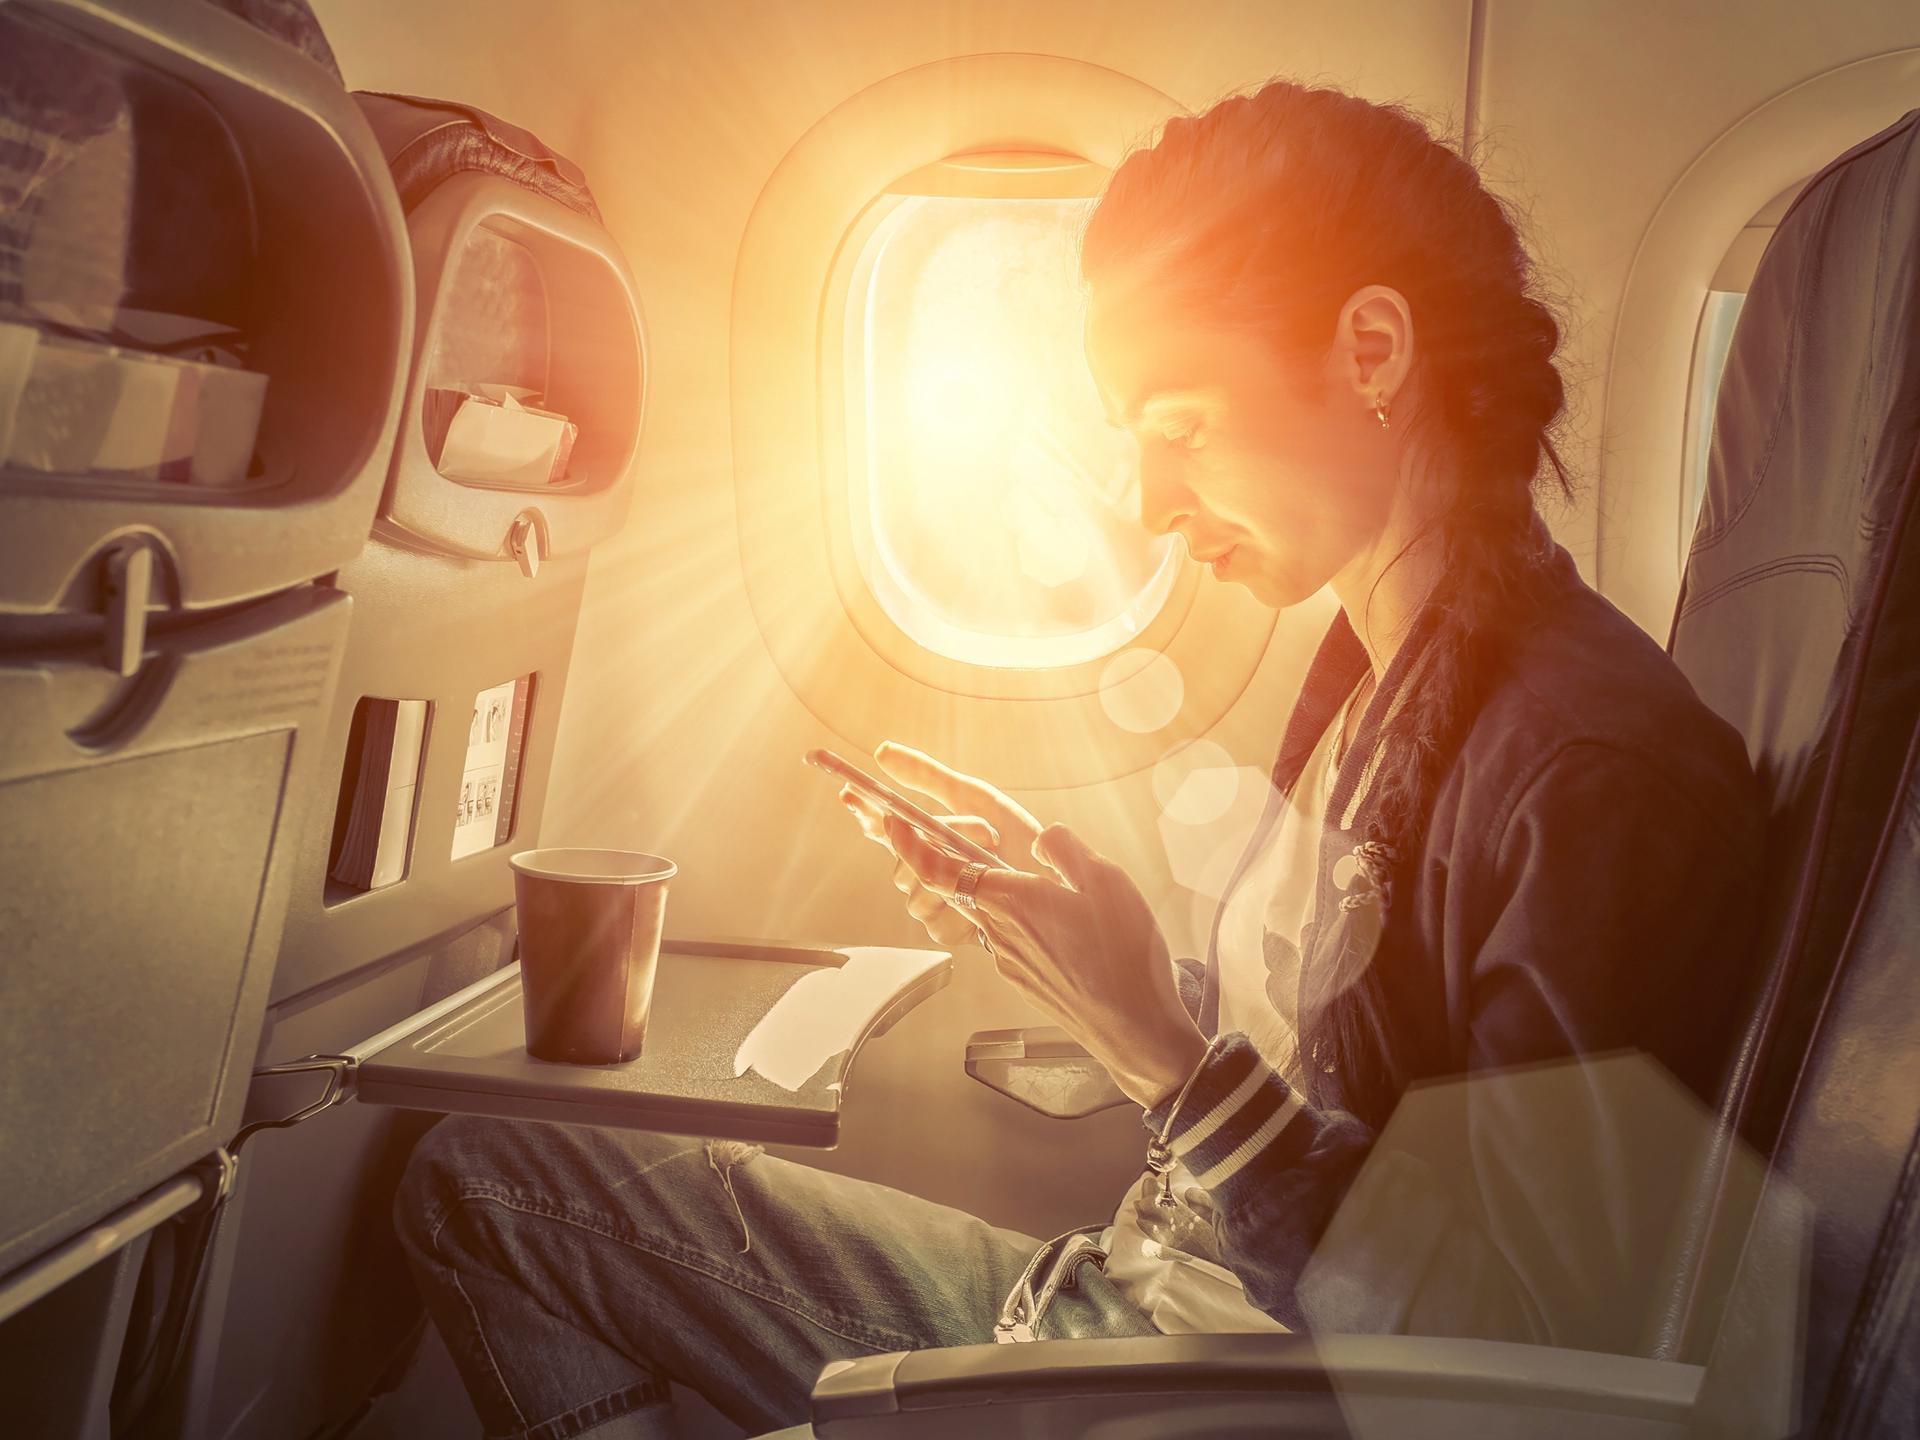 It is a photo that operates an electronic device on an airplane.